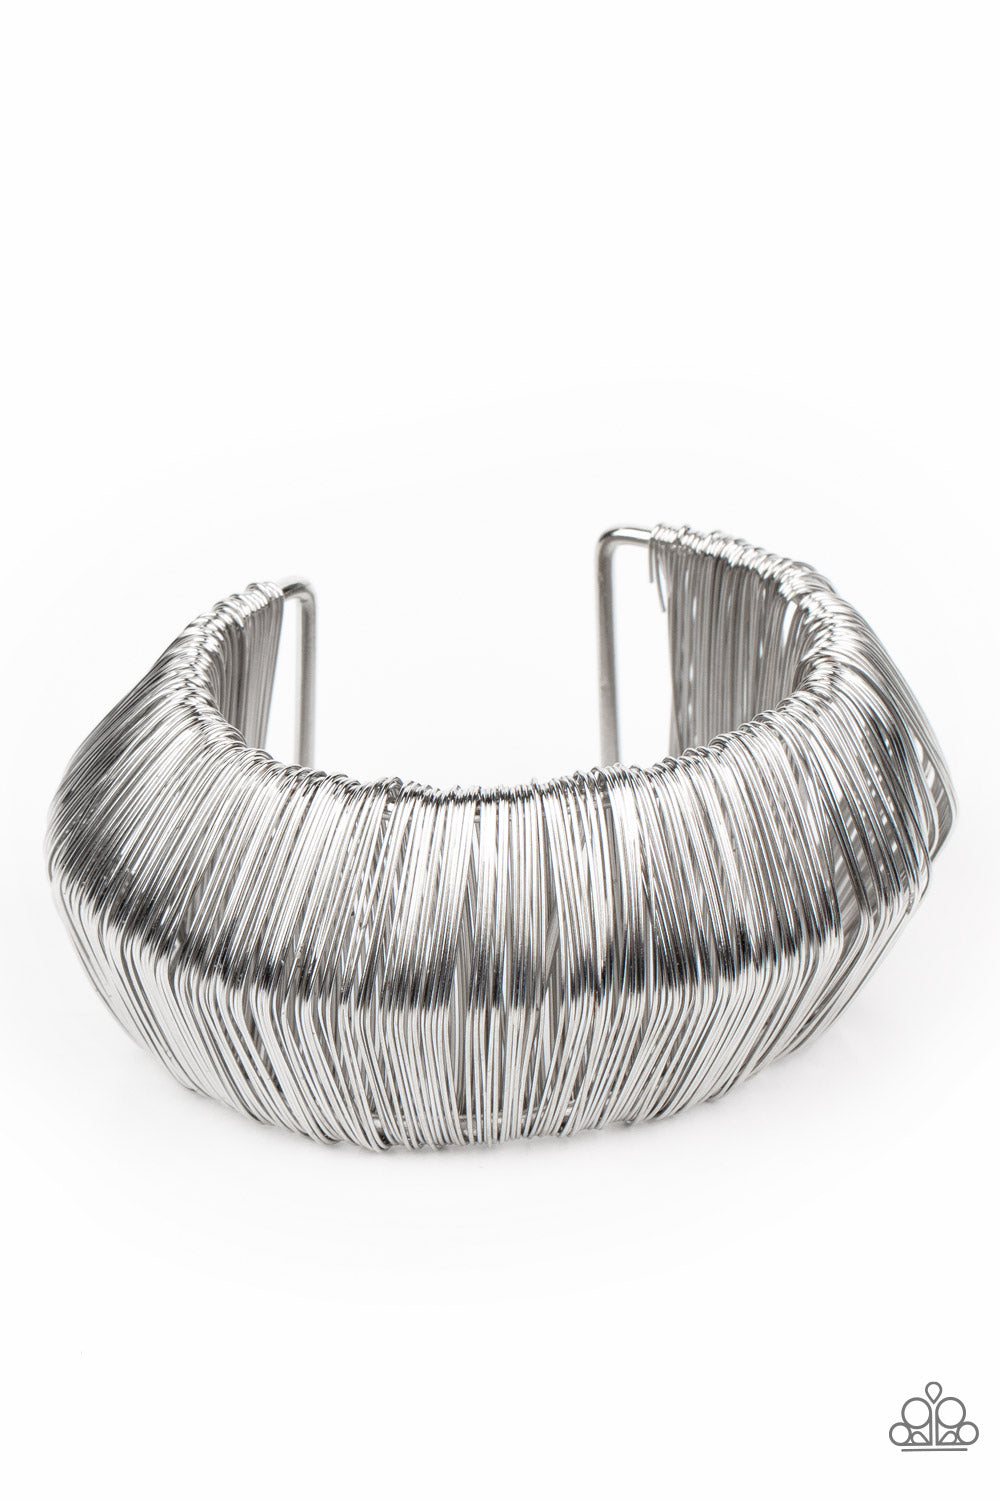 Wild About Wire - Silver Huff Bracelet